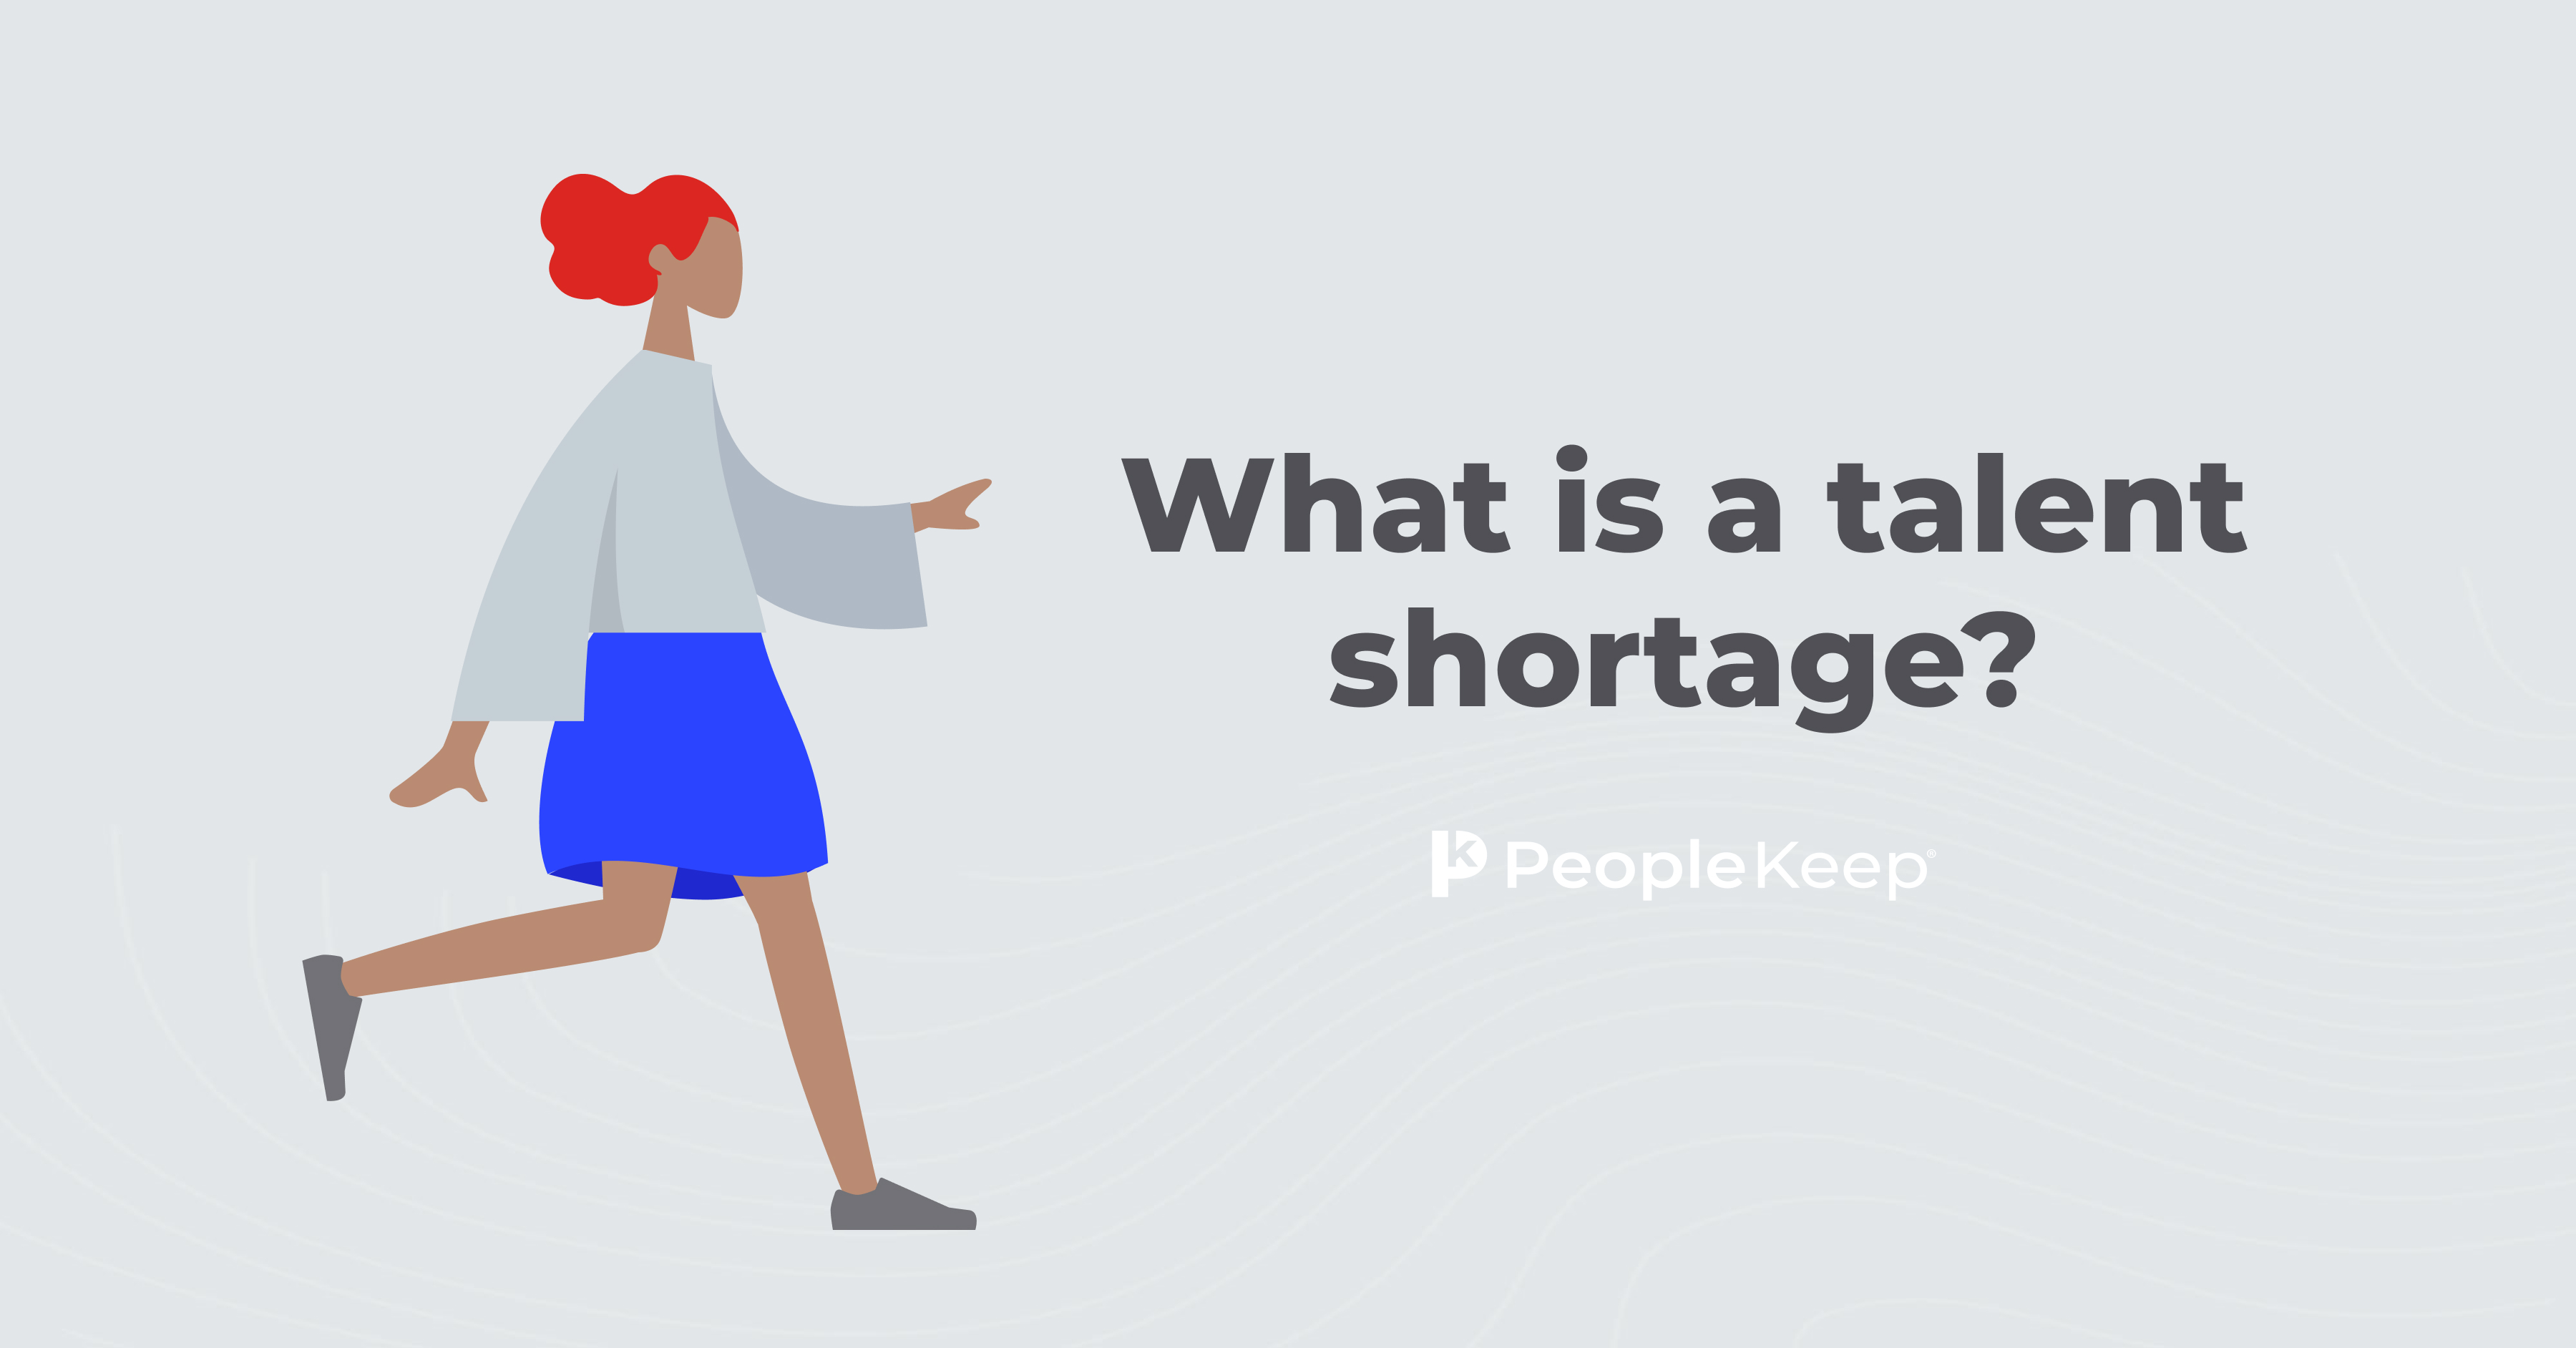 What is a talent shortage?